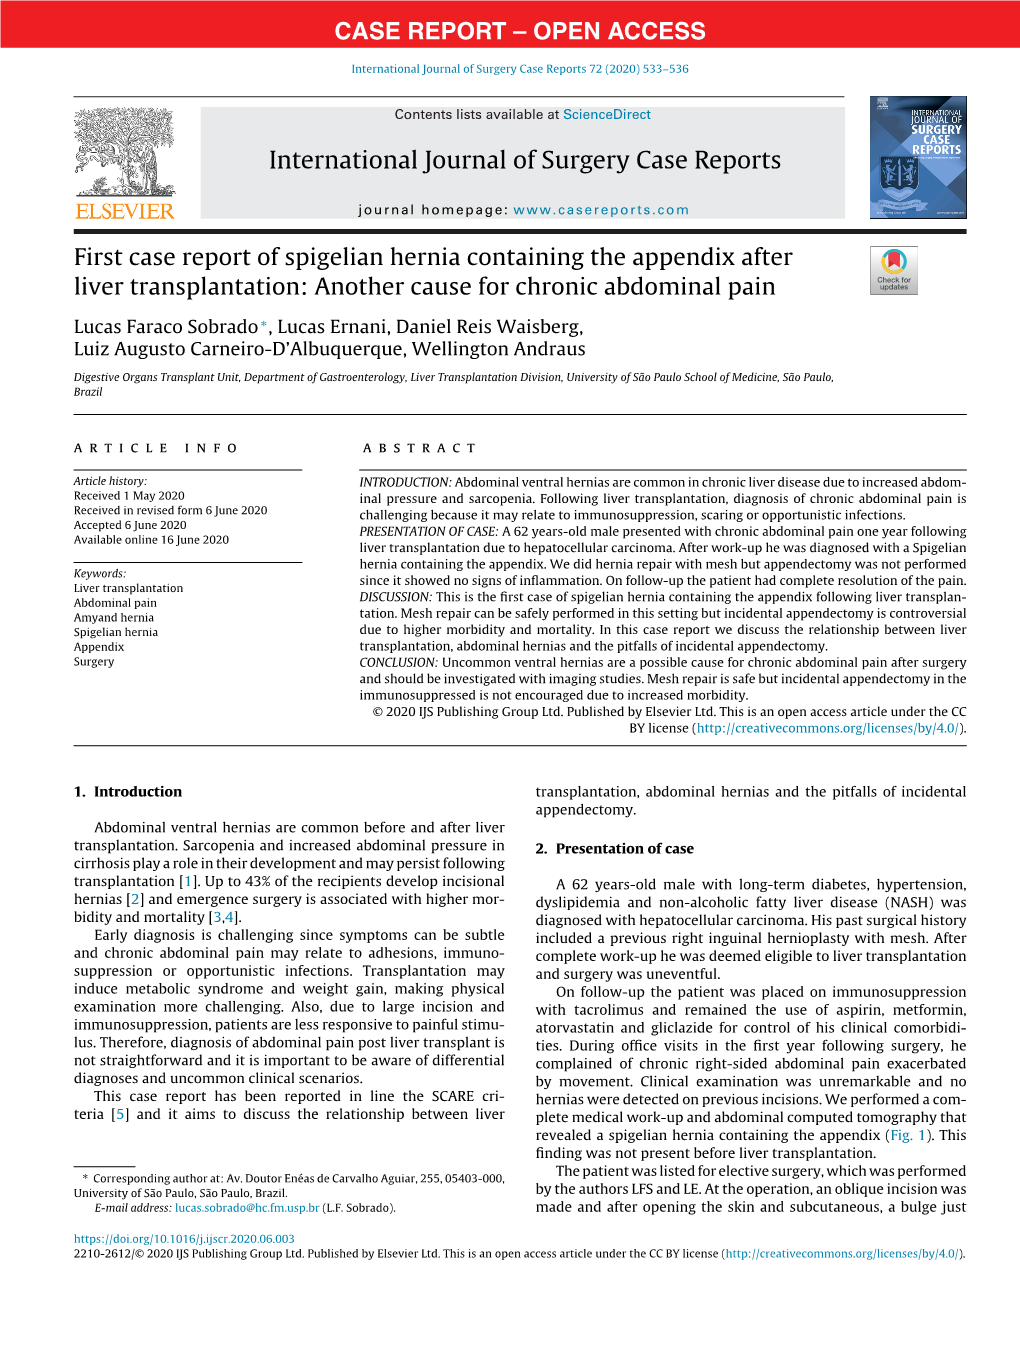 First Case Report of Spigelian Hernia Containing the Appendix After